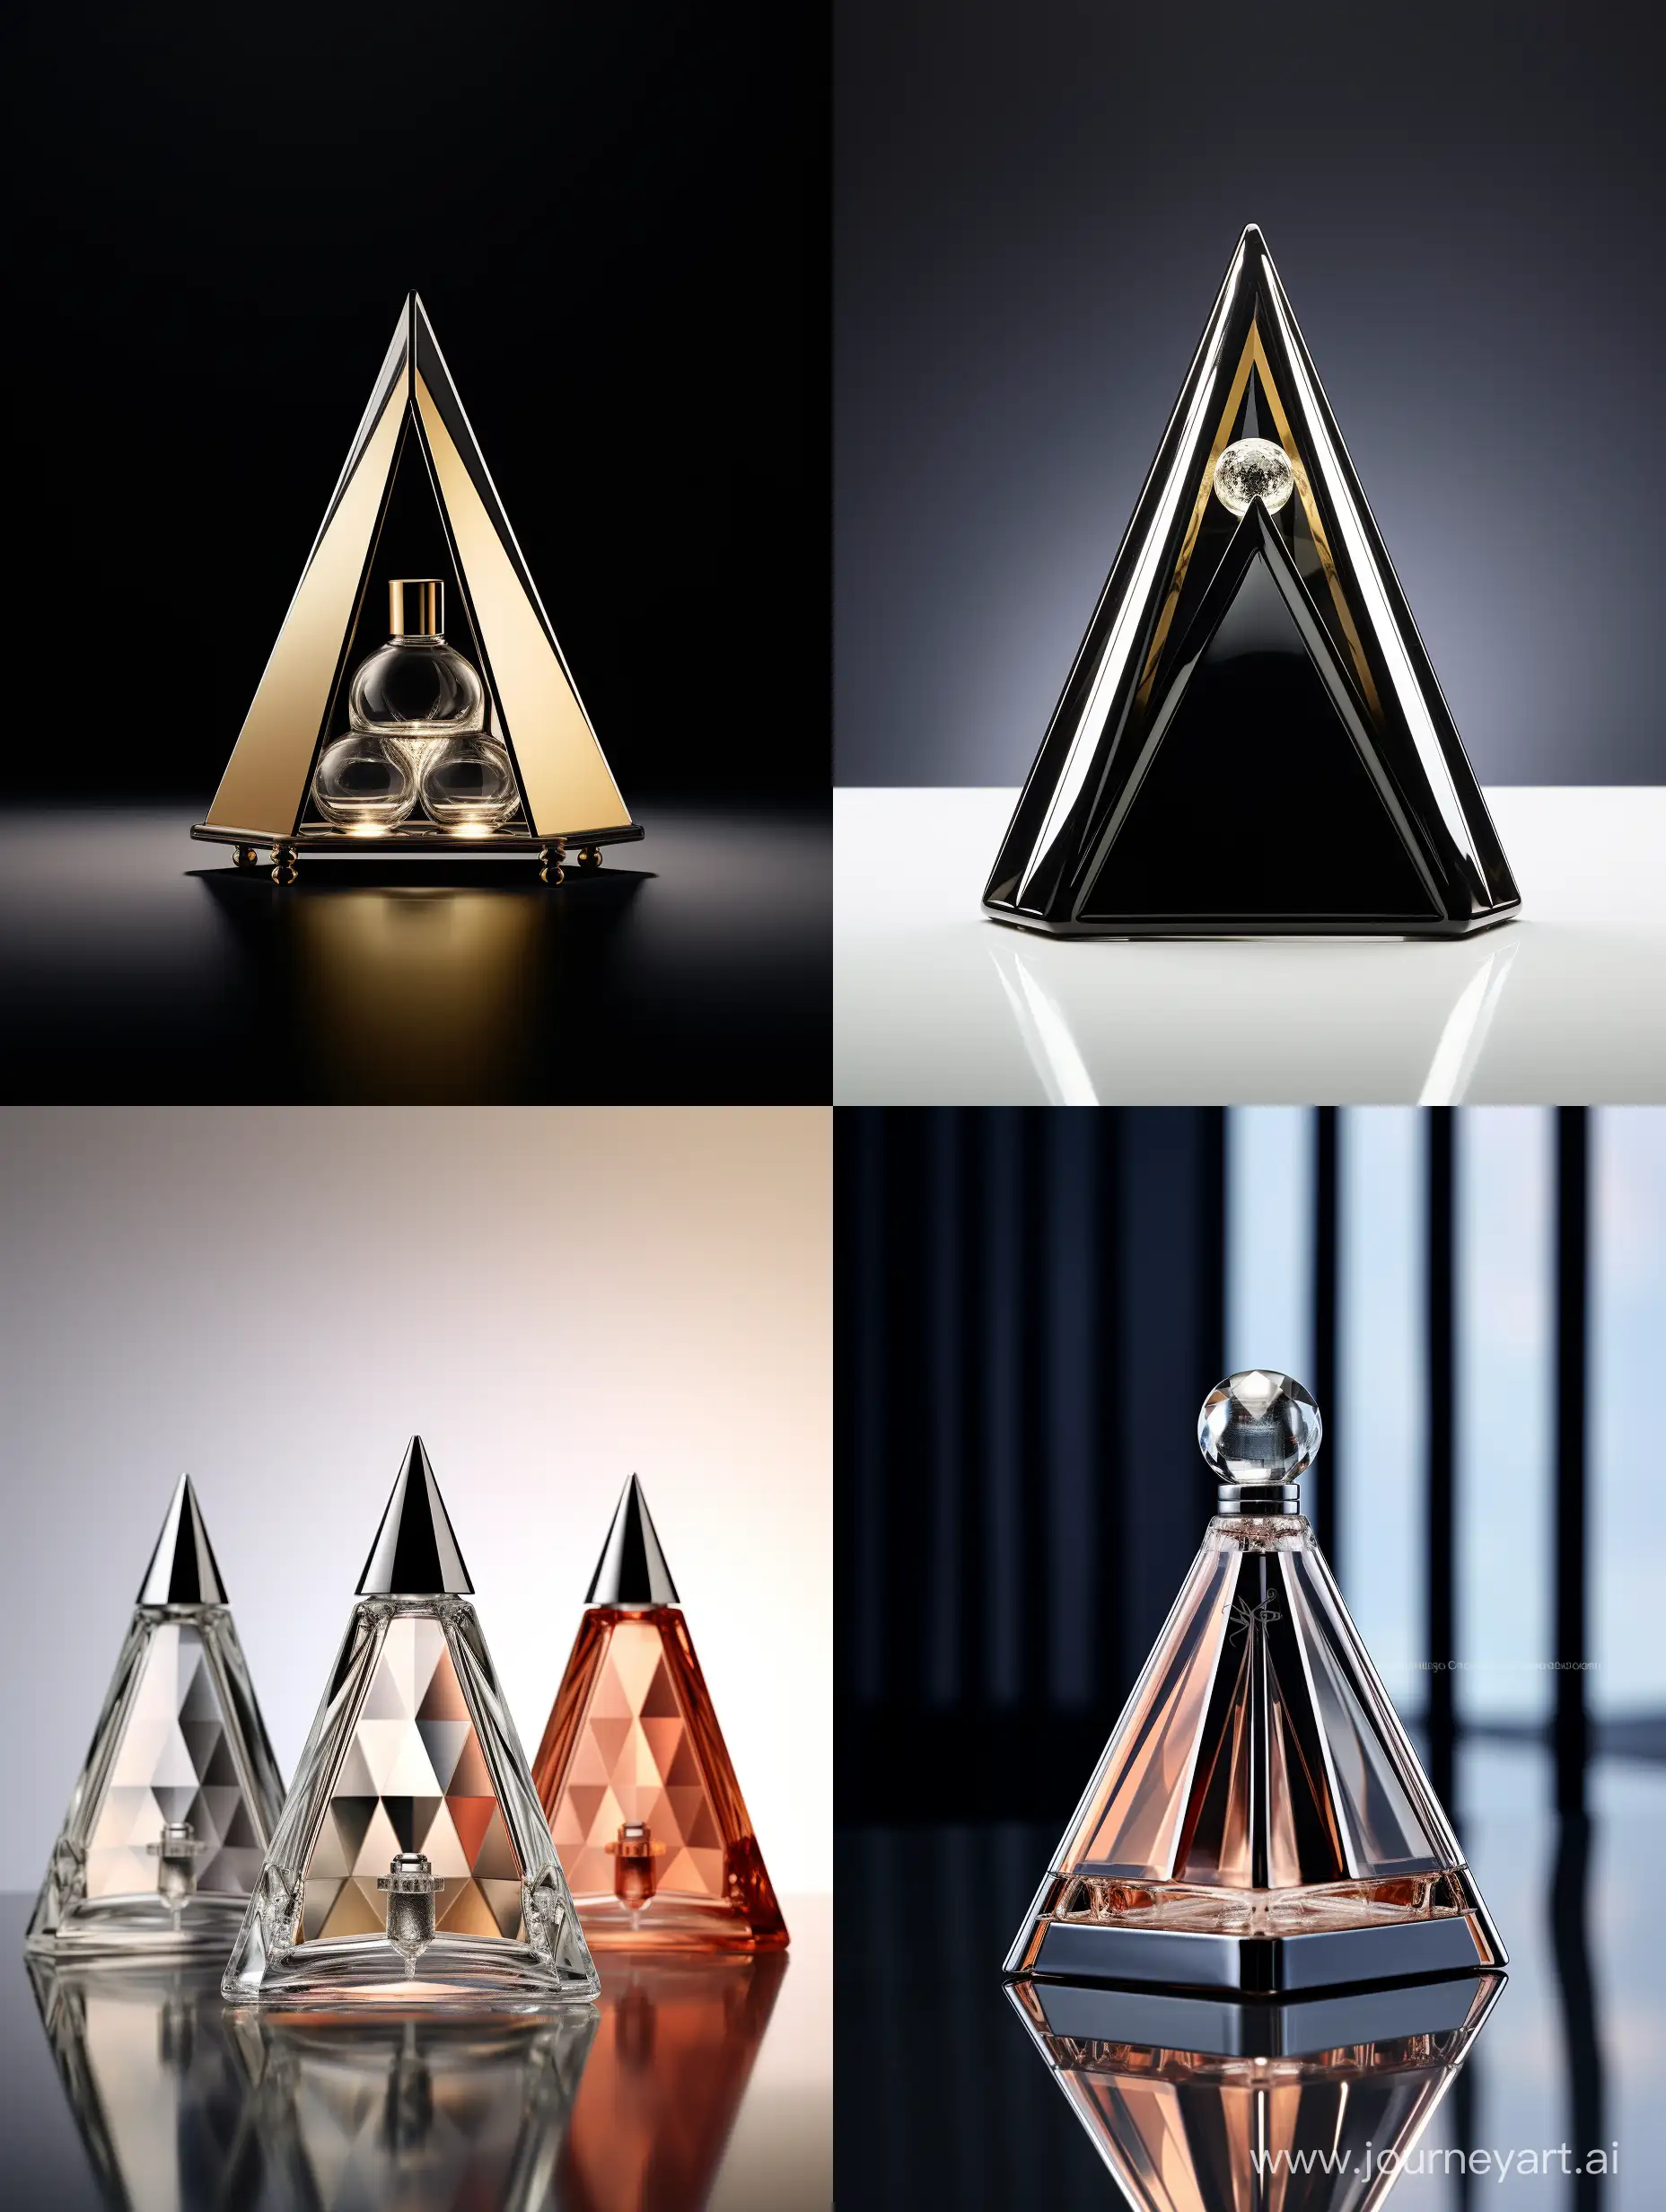 "Design an exterior for a fragrance bottle with a distinctive triangular shape. Inside the main triangular container, create a compartment to house a smaller bottle for a unique fragrance. Pay special attention to the details of both the outer and inner bottle designs, ensuring they complement each other seamlessly. Consider elements that enhance the overall aesthetic and functionality, delivering an elegant and captivating visual appeal."\